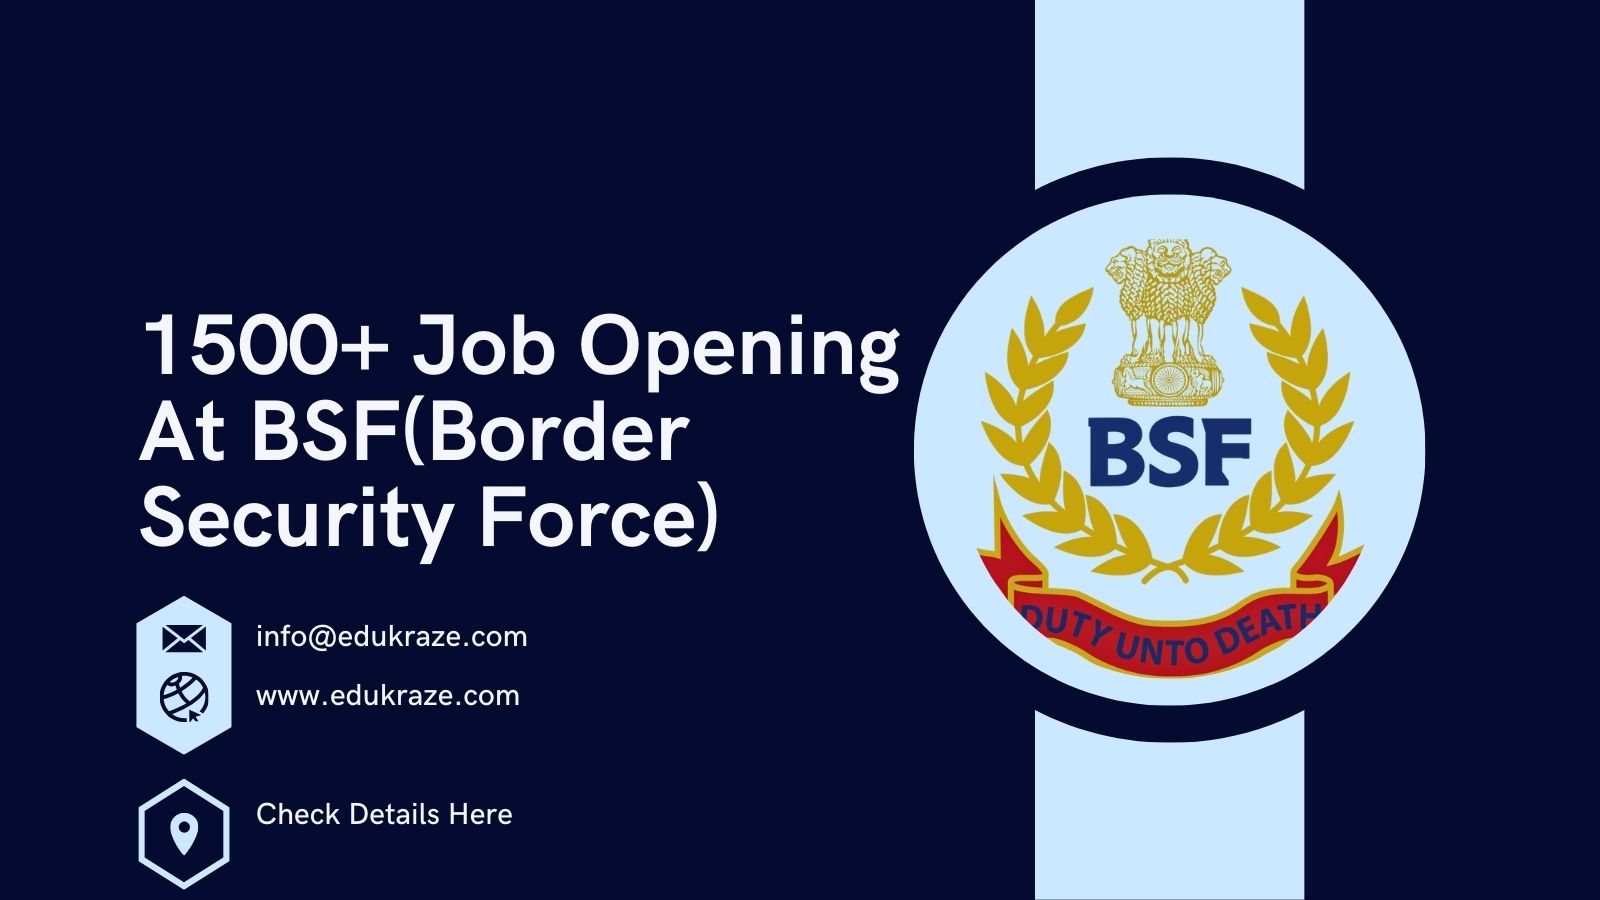 BSF Mega Recruitment Out for 1500+ Jobs, Check Full Details Here!